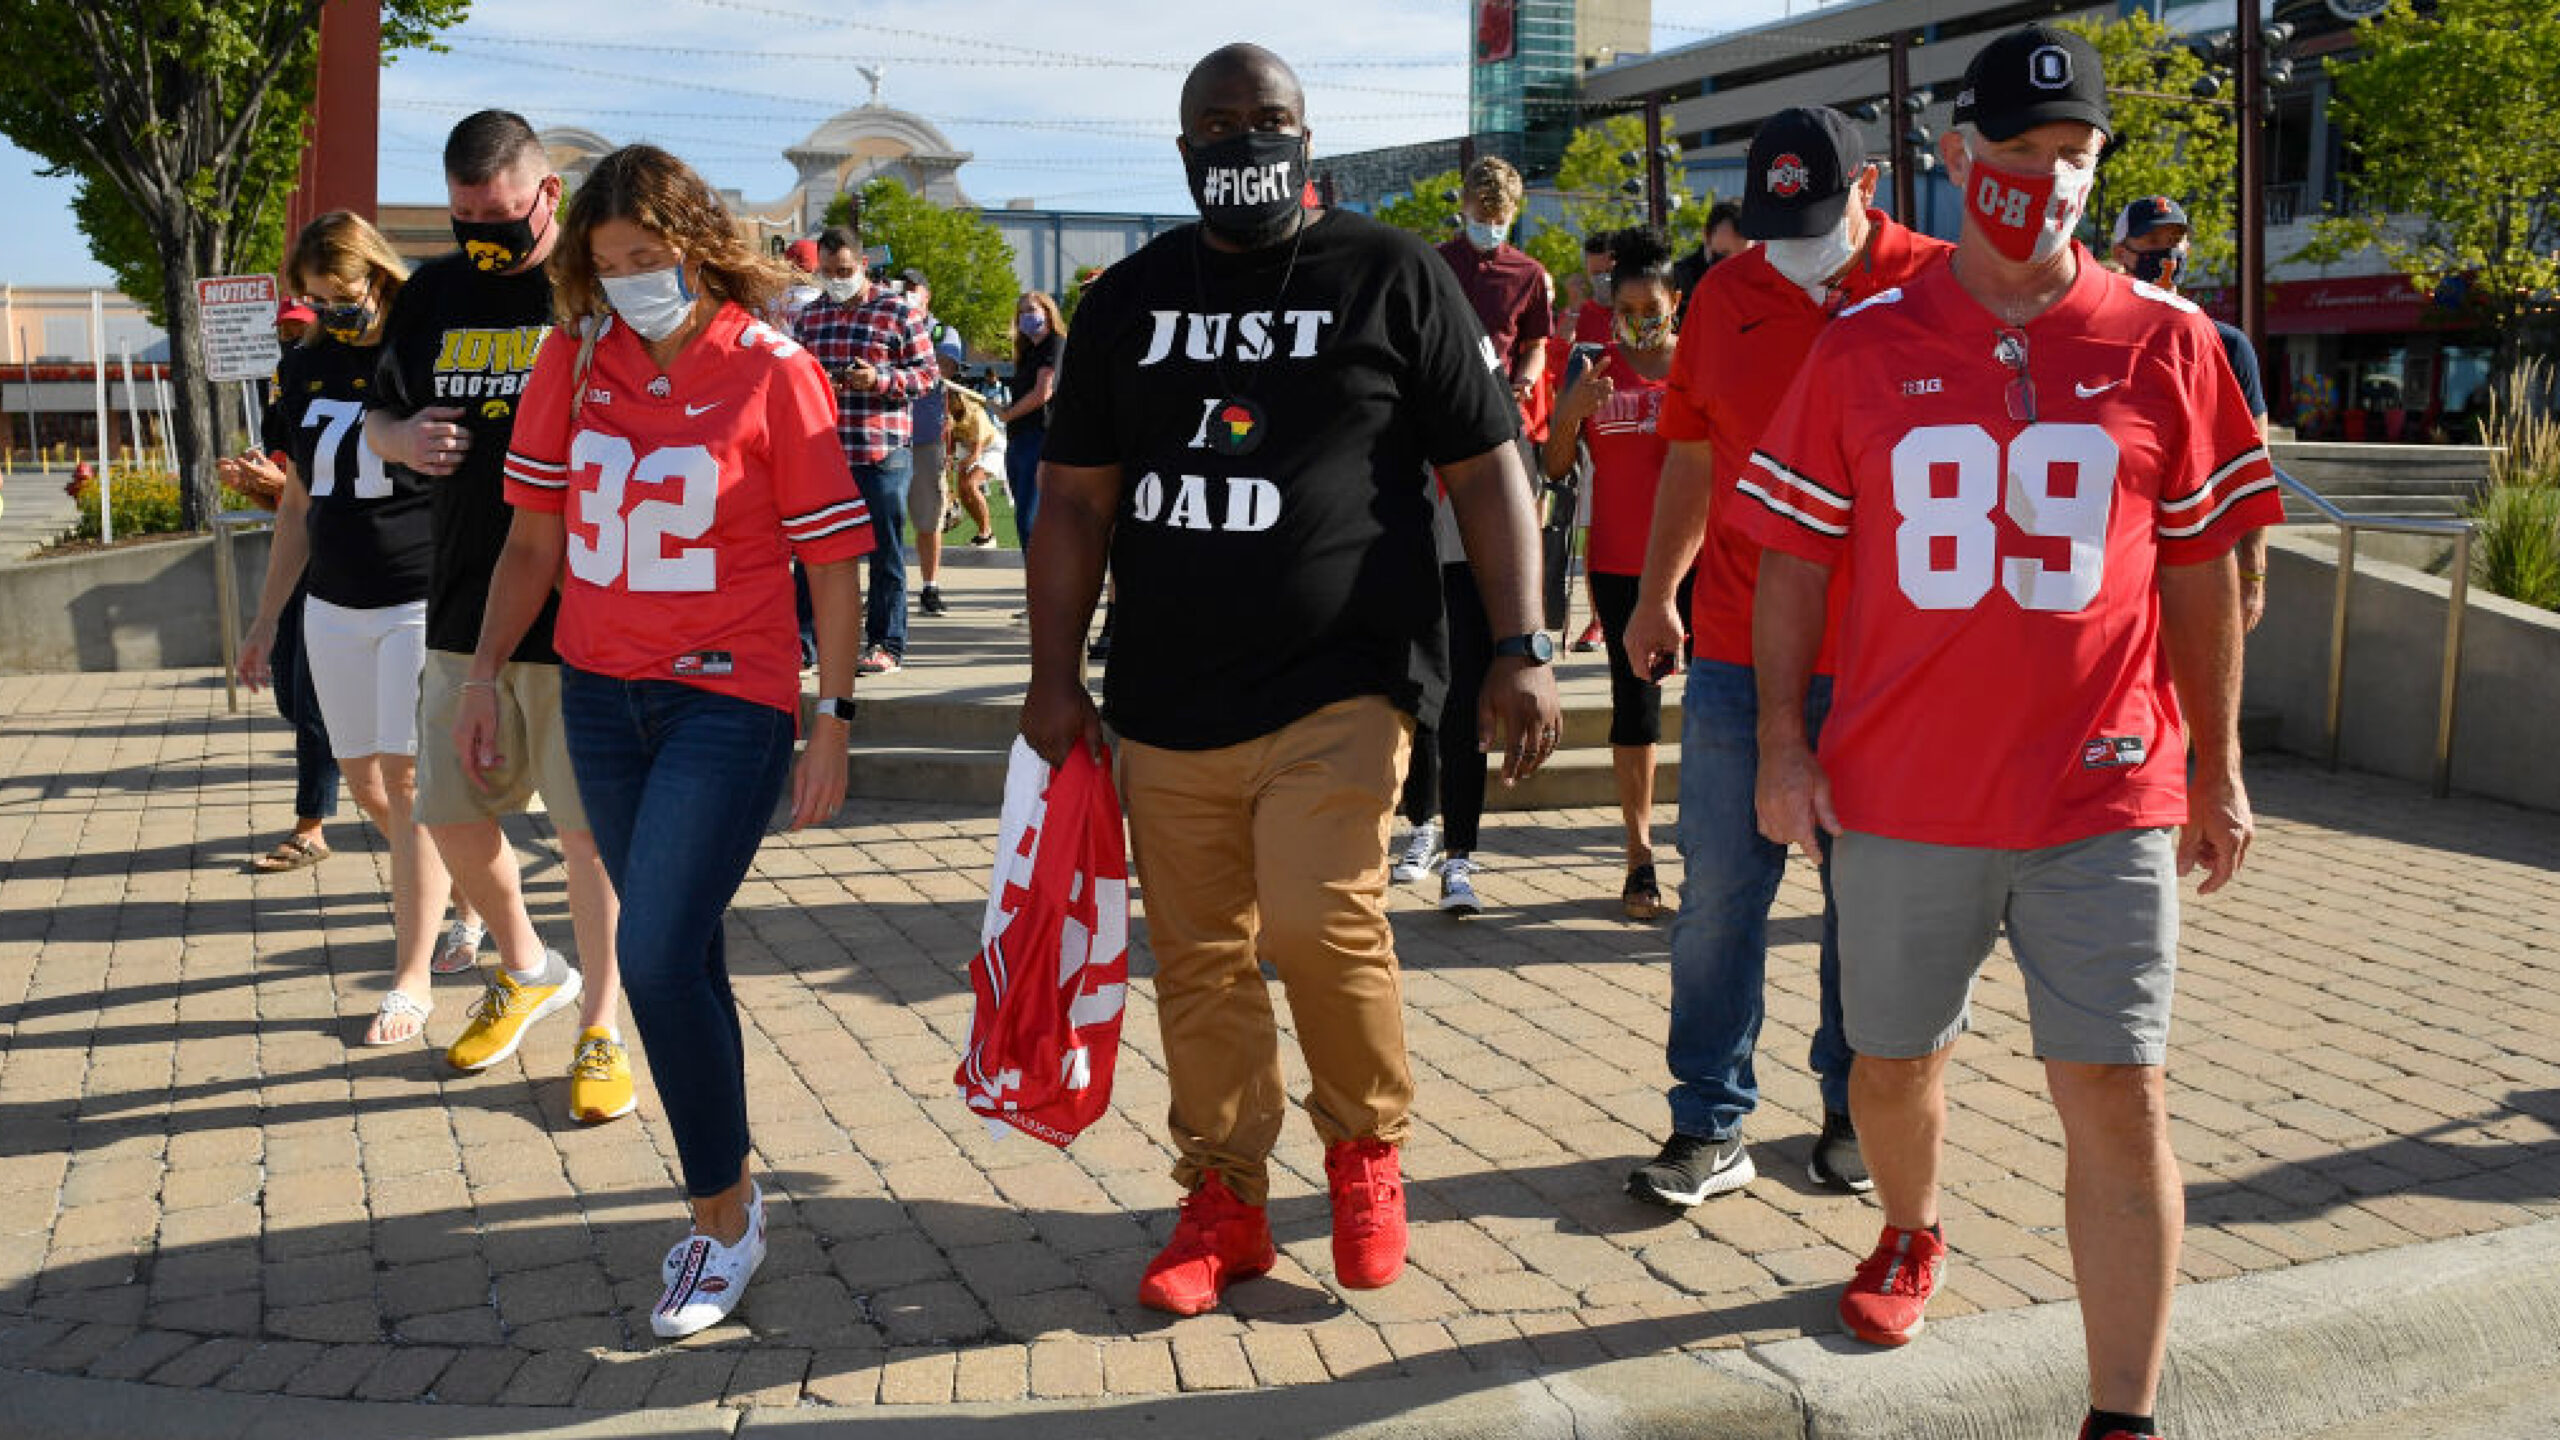 ROSEMONT, ILLINOIS - AUGUST 21: Randy Wade, father of Shaun Wade of the Ohio State Buckeyes, marches during a parent rally outside of the Big Ten Conference headquarters on August 21, 2020 in Rosemont, Illinois. The Big Ten conference made the decision to delay the fall football season until the spring to protect players and staff as transmission of the COVID-19 virus continues to rise. (Photo by Quinn Harris/Getty Images)